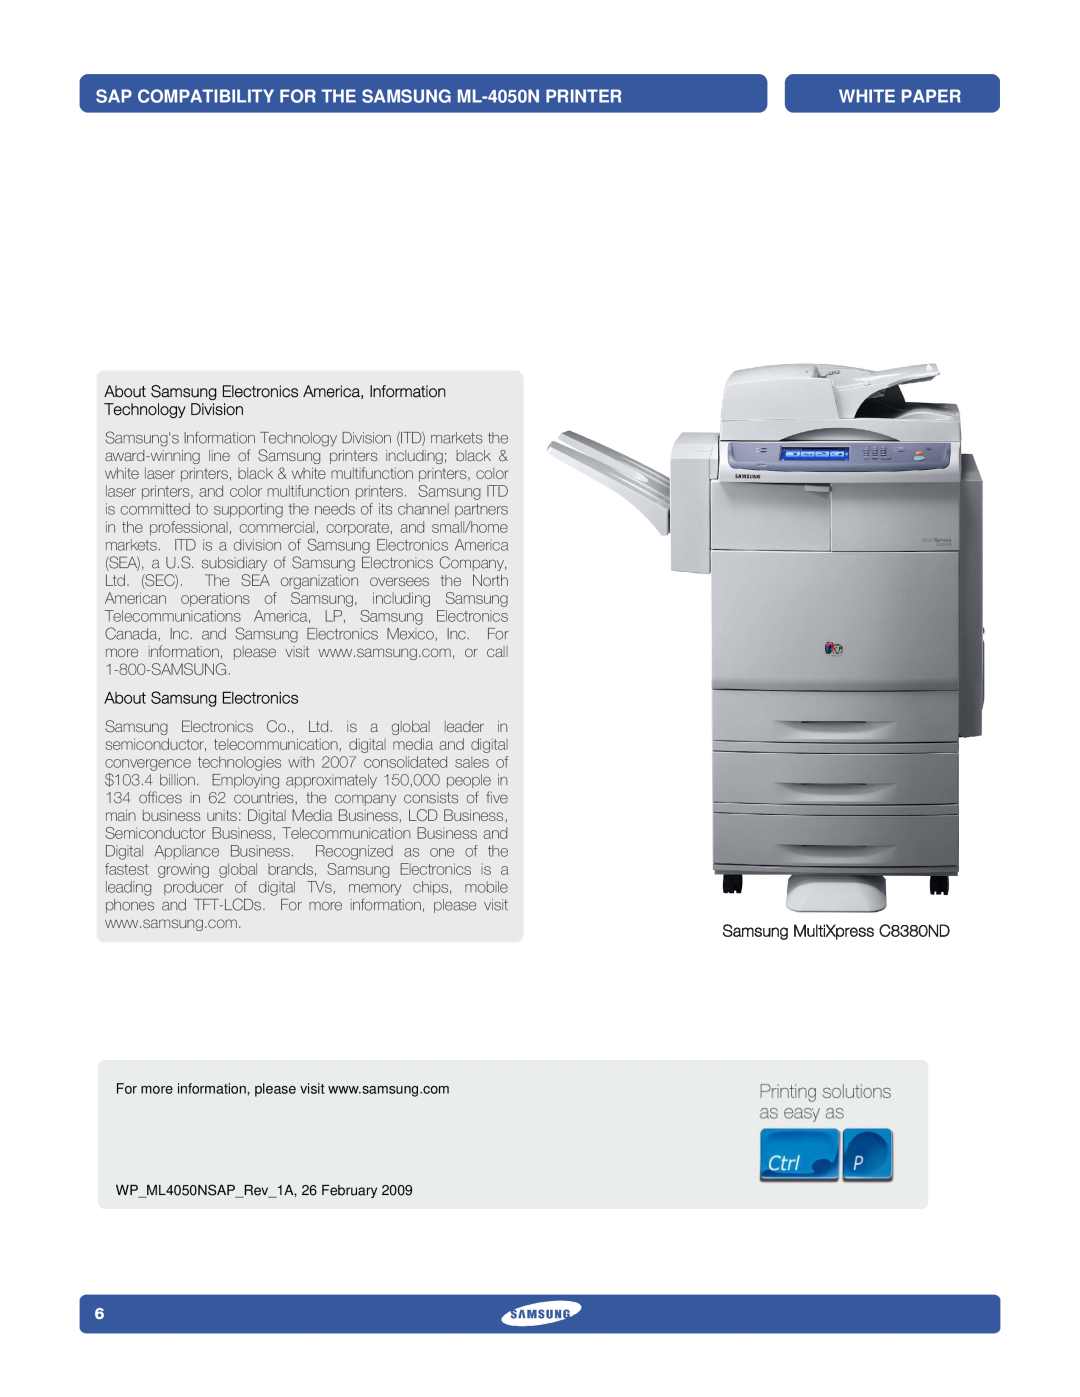 Samsung specifications SAP COMPATIBILITY FOR THE SAMSUNG ML-4050N PRINTER, White Paper, About Samsung Electronics 